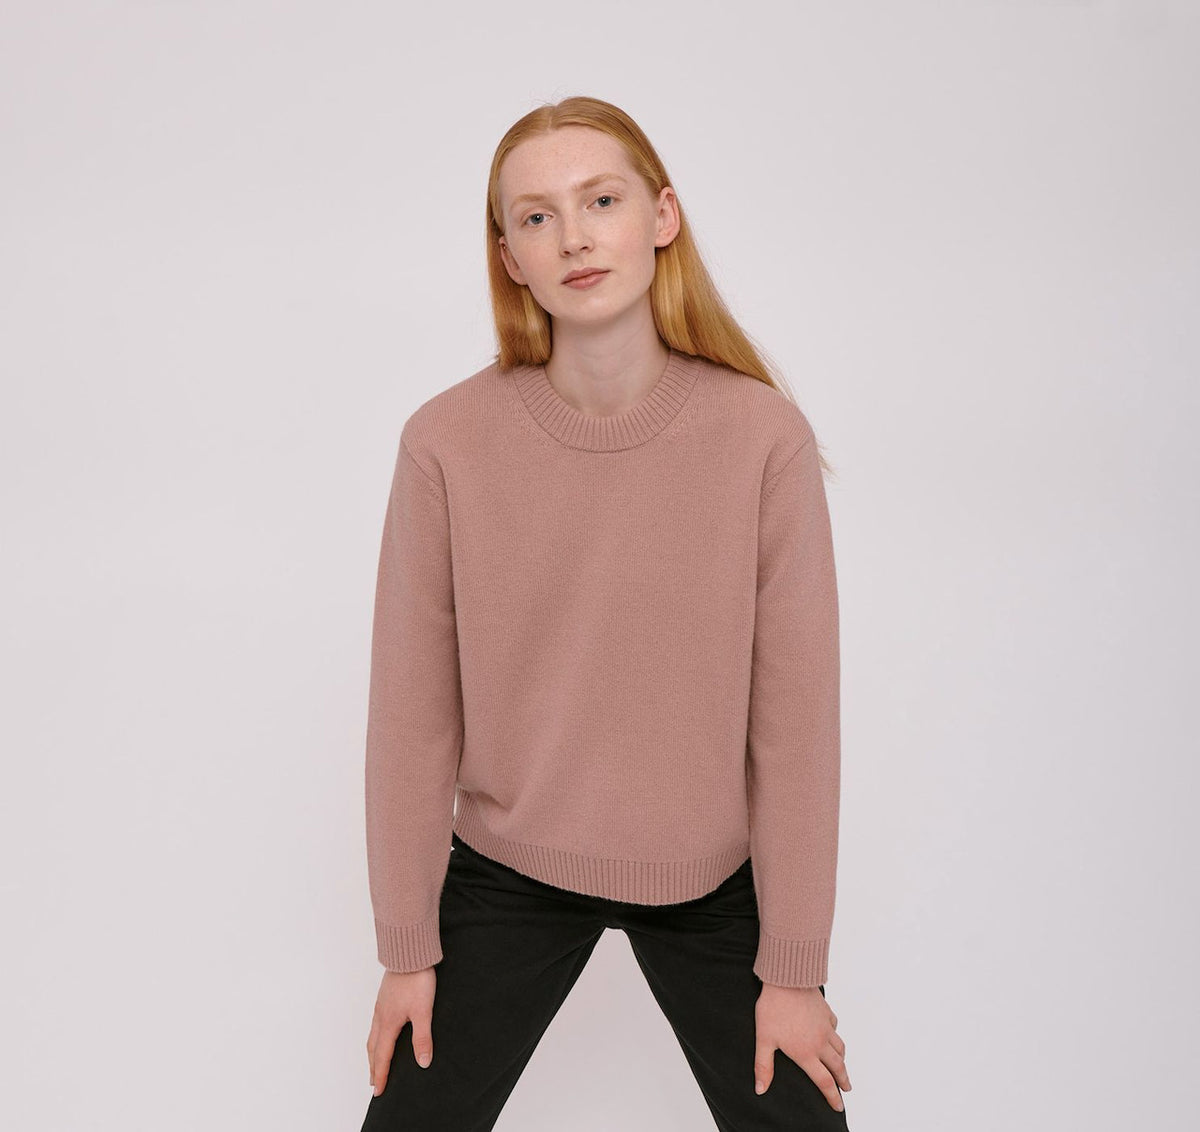 The model is wearing an Organic Basics Recycled Wool Boxy Knit Jumper in Dusty Rose and black pants.